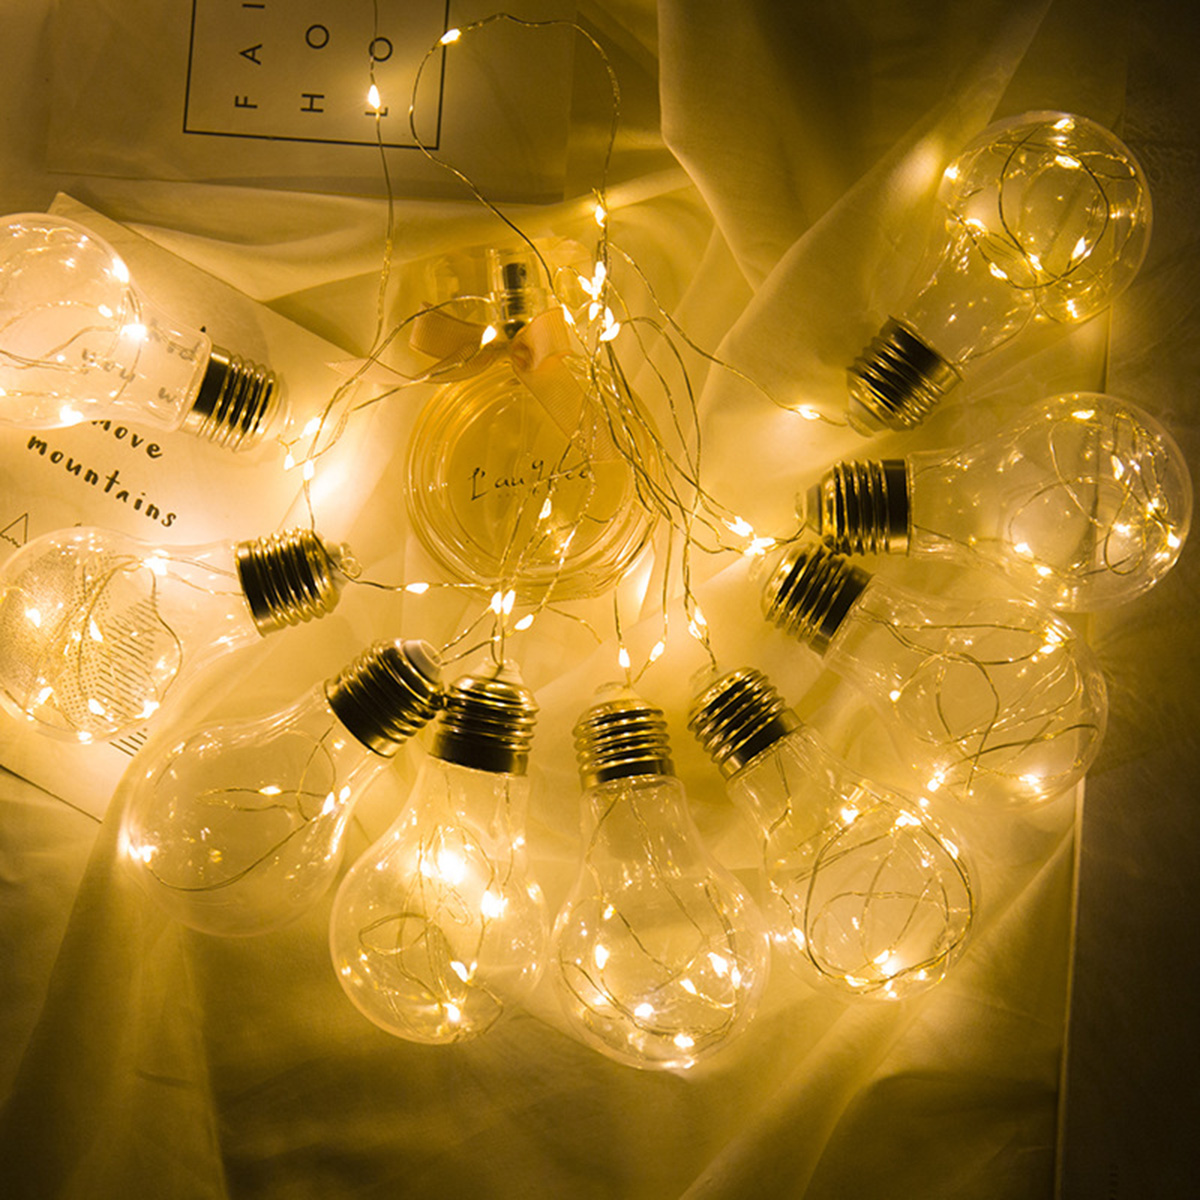 10-Bulbs-Light-Hanging-LED-String-Light-Firefly-Party-Wedding-Home-Decoration-Romantic-1339196-1